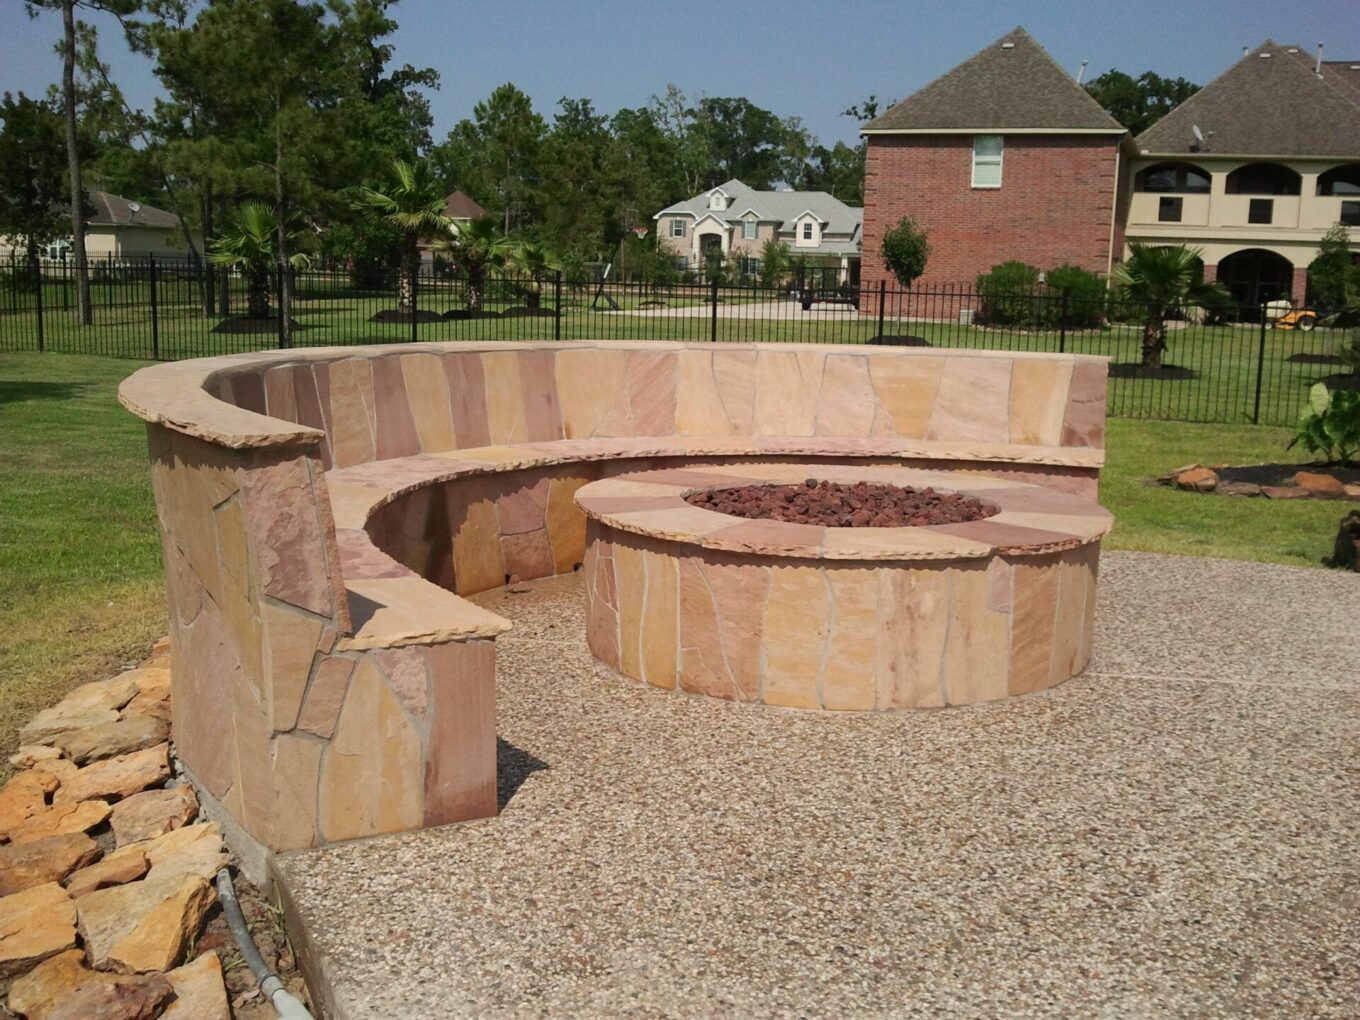 A fire pit sitting in the middle of a gravel area.